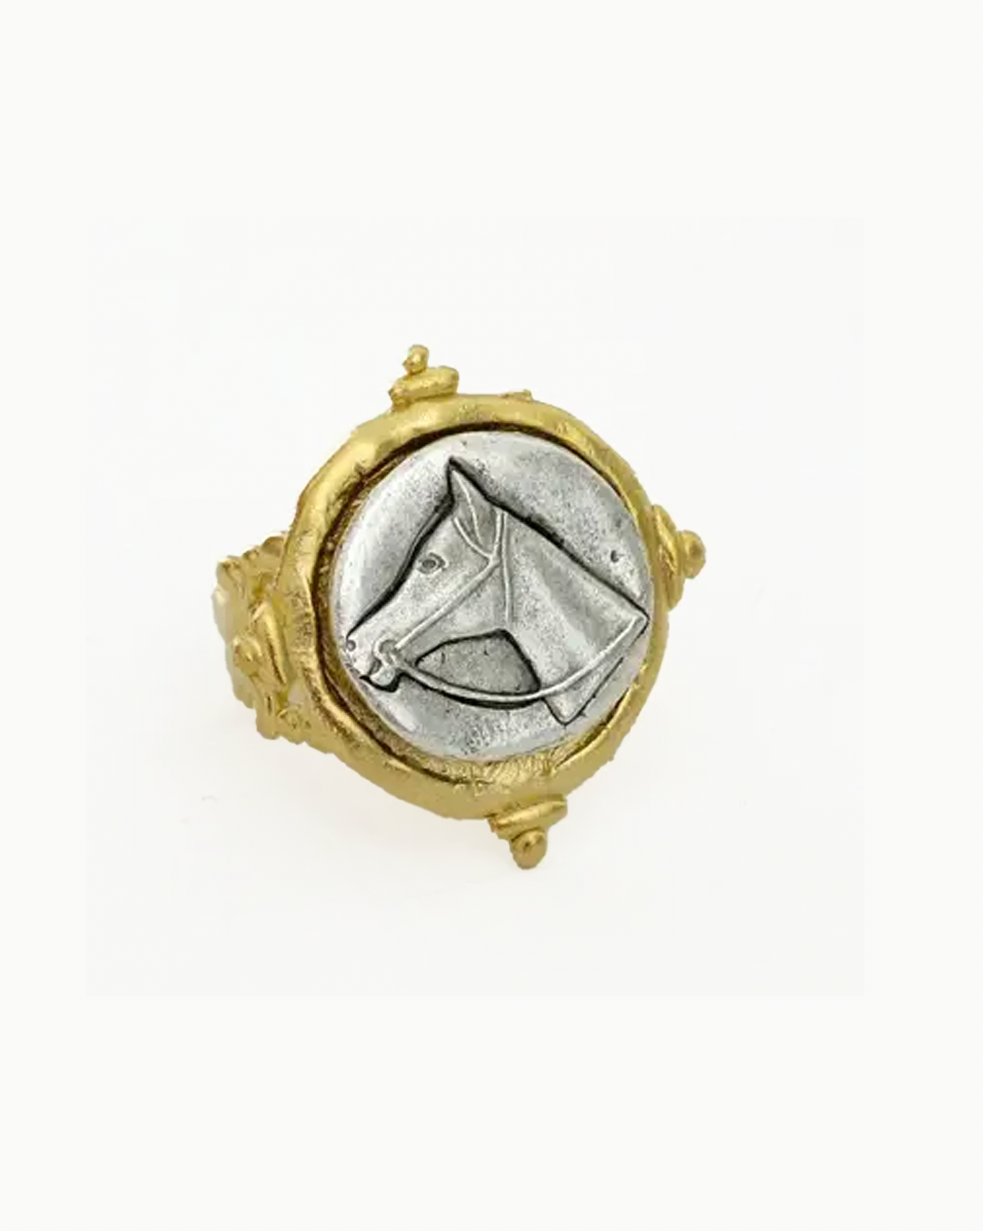 Handcast Gold and Silver Intaglio Horse Adjustable Ring